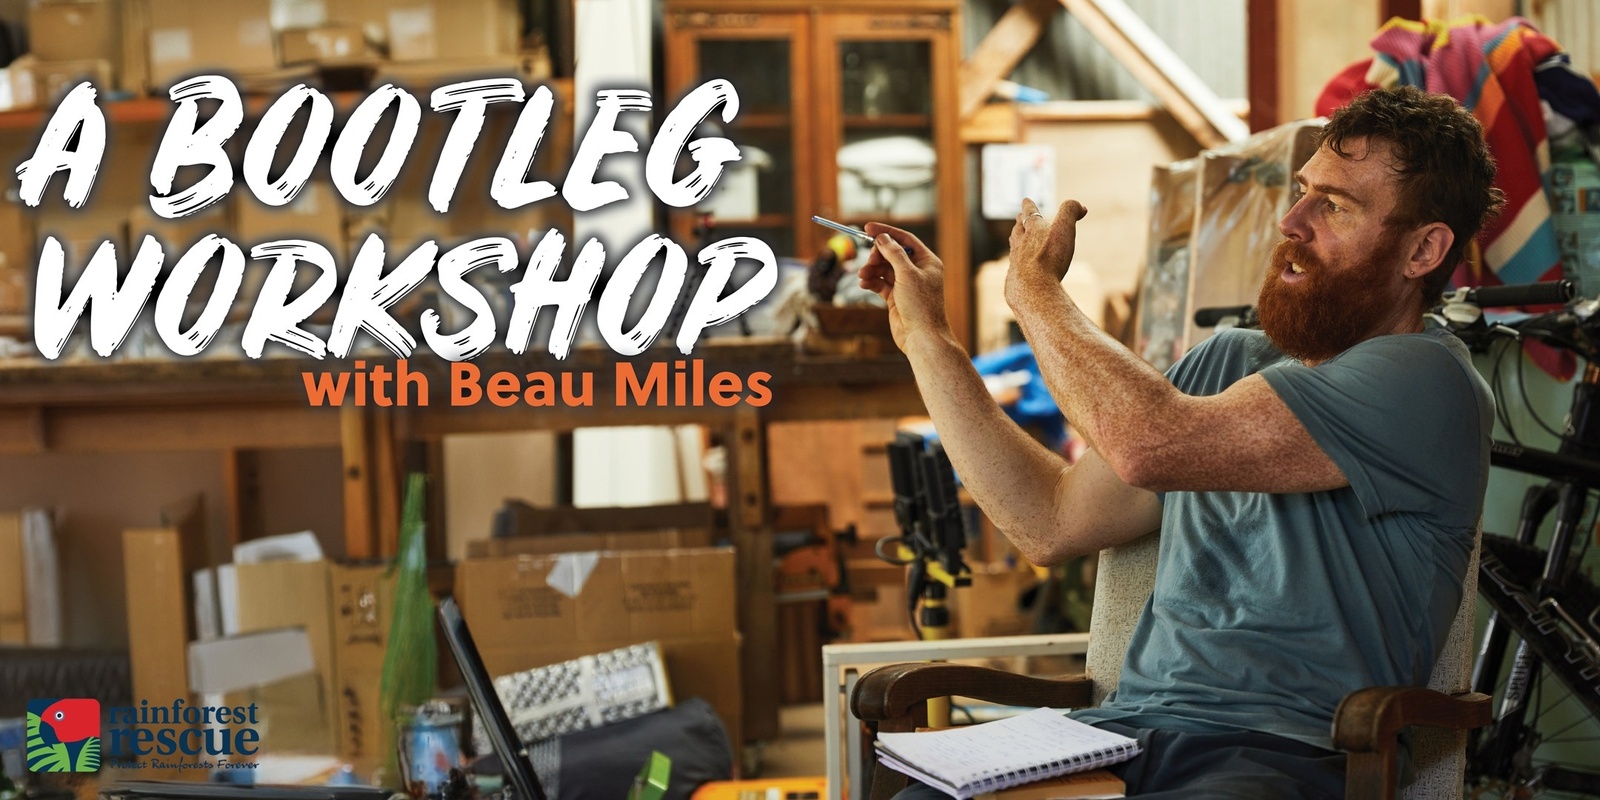 Banner image for A Bootleg Workshop with Beau Miles